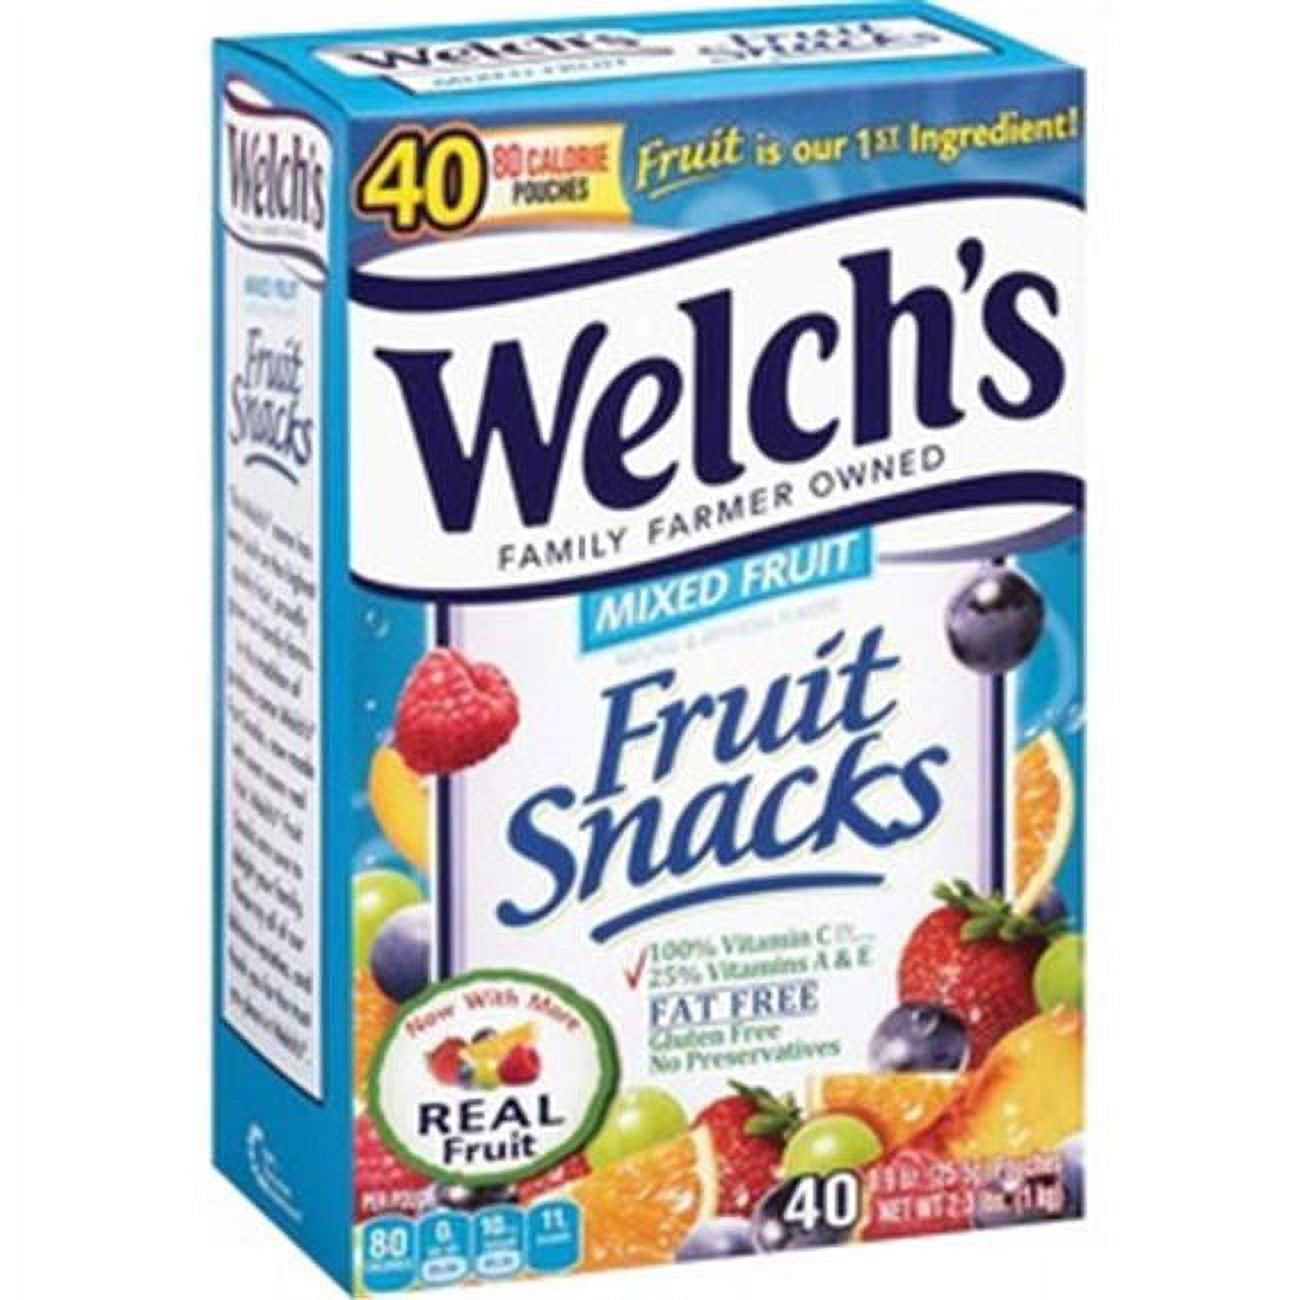 Welch's Fruit Snacks, Mixed Fruit, Gluten Free, Bulk Pack, 0.9 oz Individual Single Serve Bags (Pack of 40) - image 1 of 3